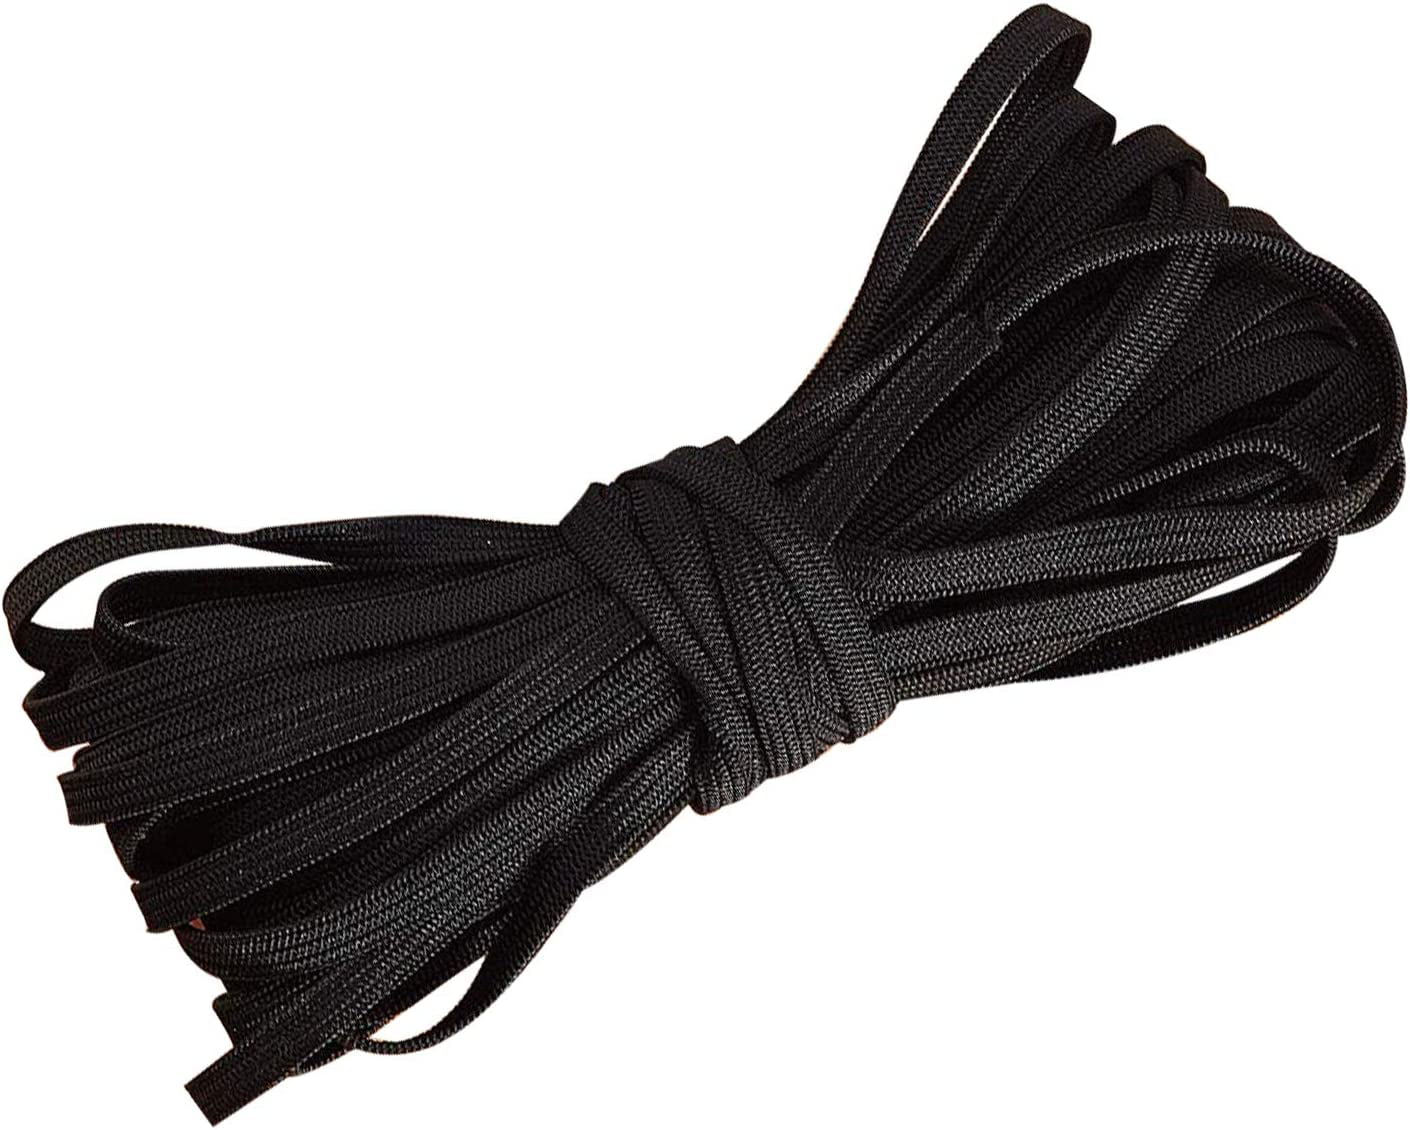 Trimming Shop 7mm Elastic Band Stretchable Smooth Finish Elastic Cord Thread  Sewing - Black, 250mtr 